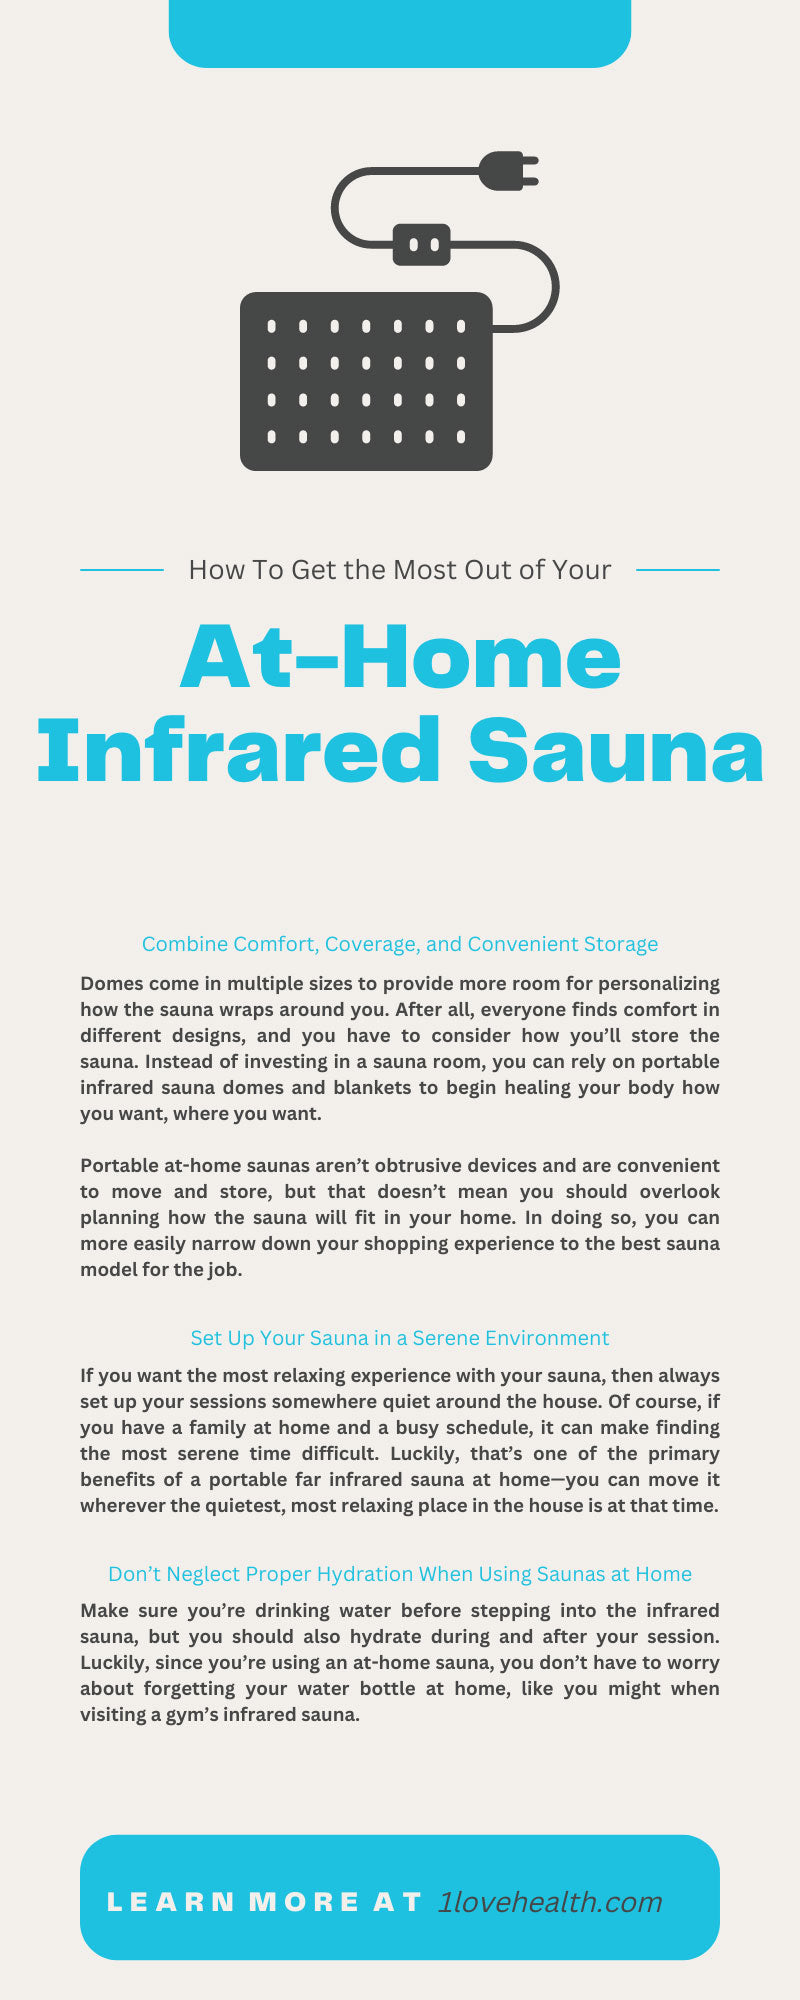 How To Get the Most Out of Your At-Home Infrared Sauna